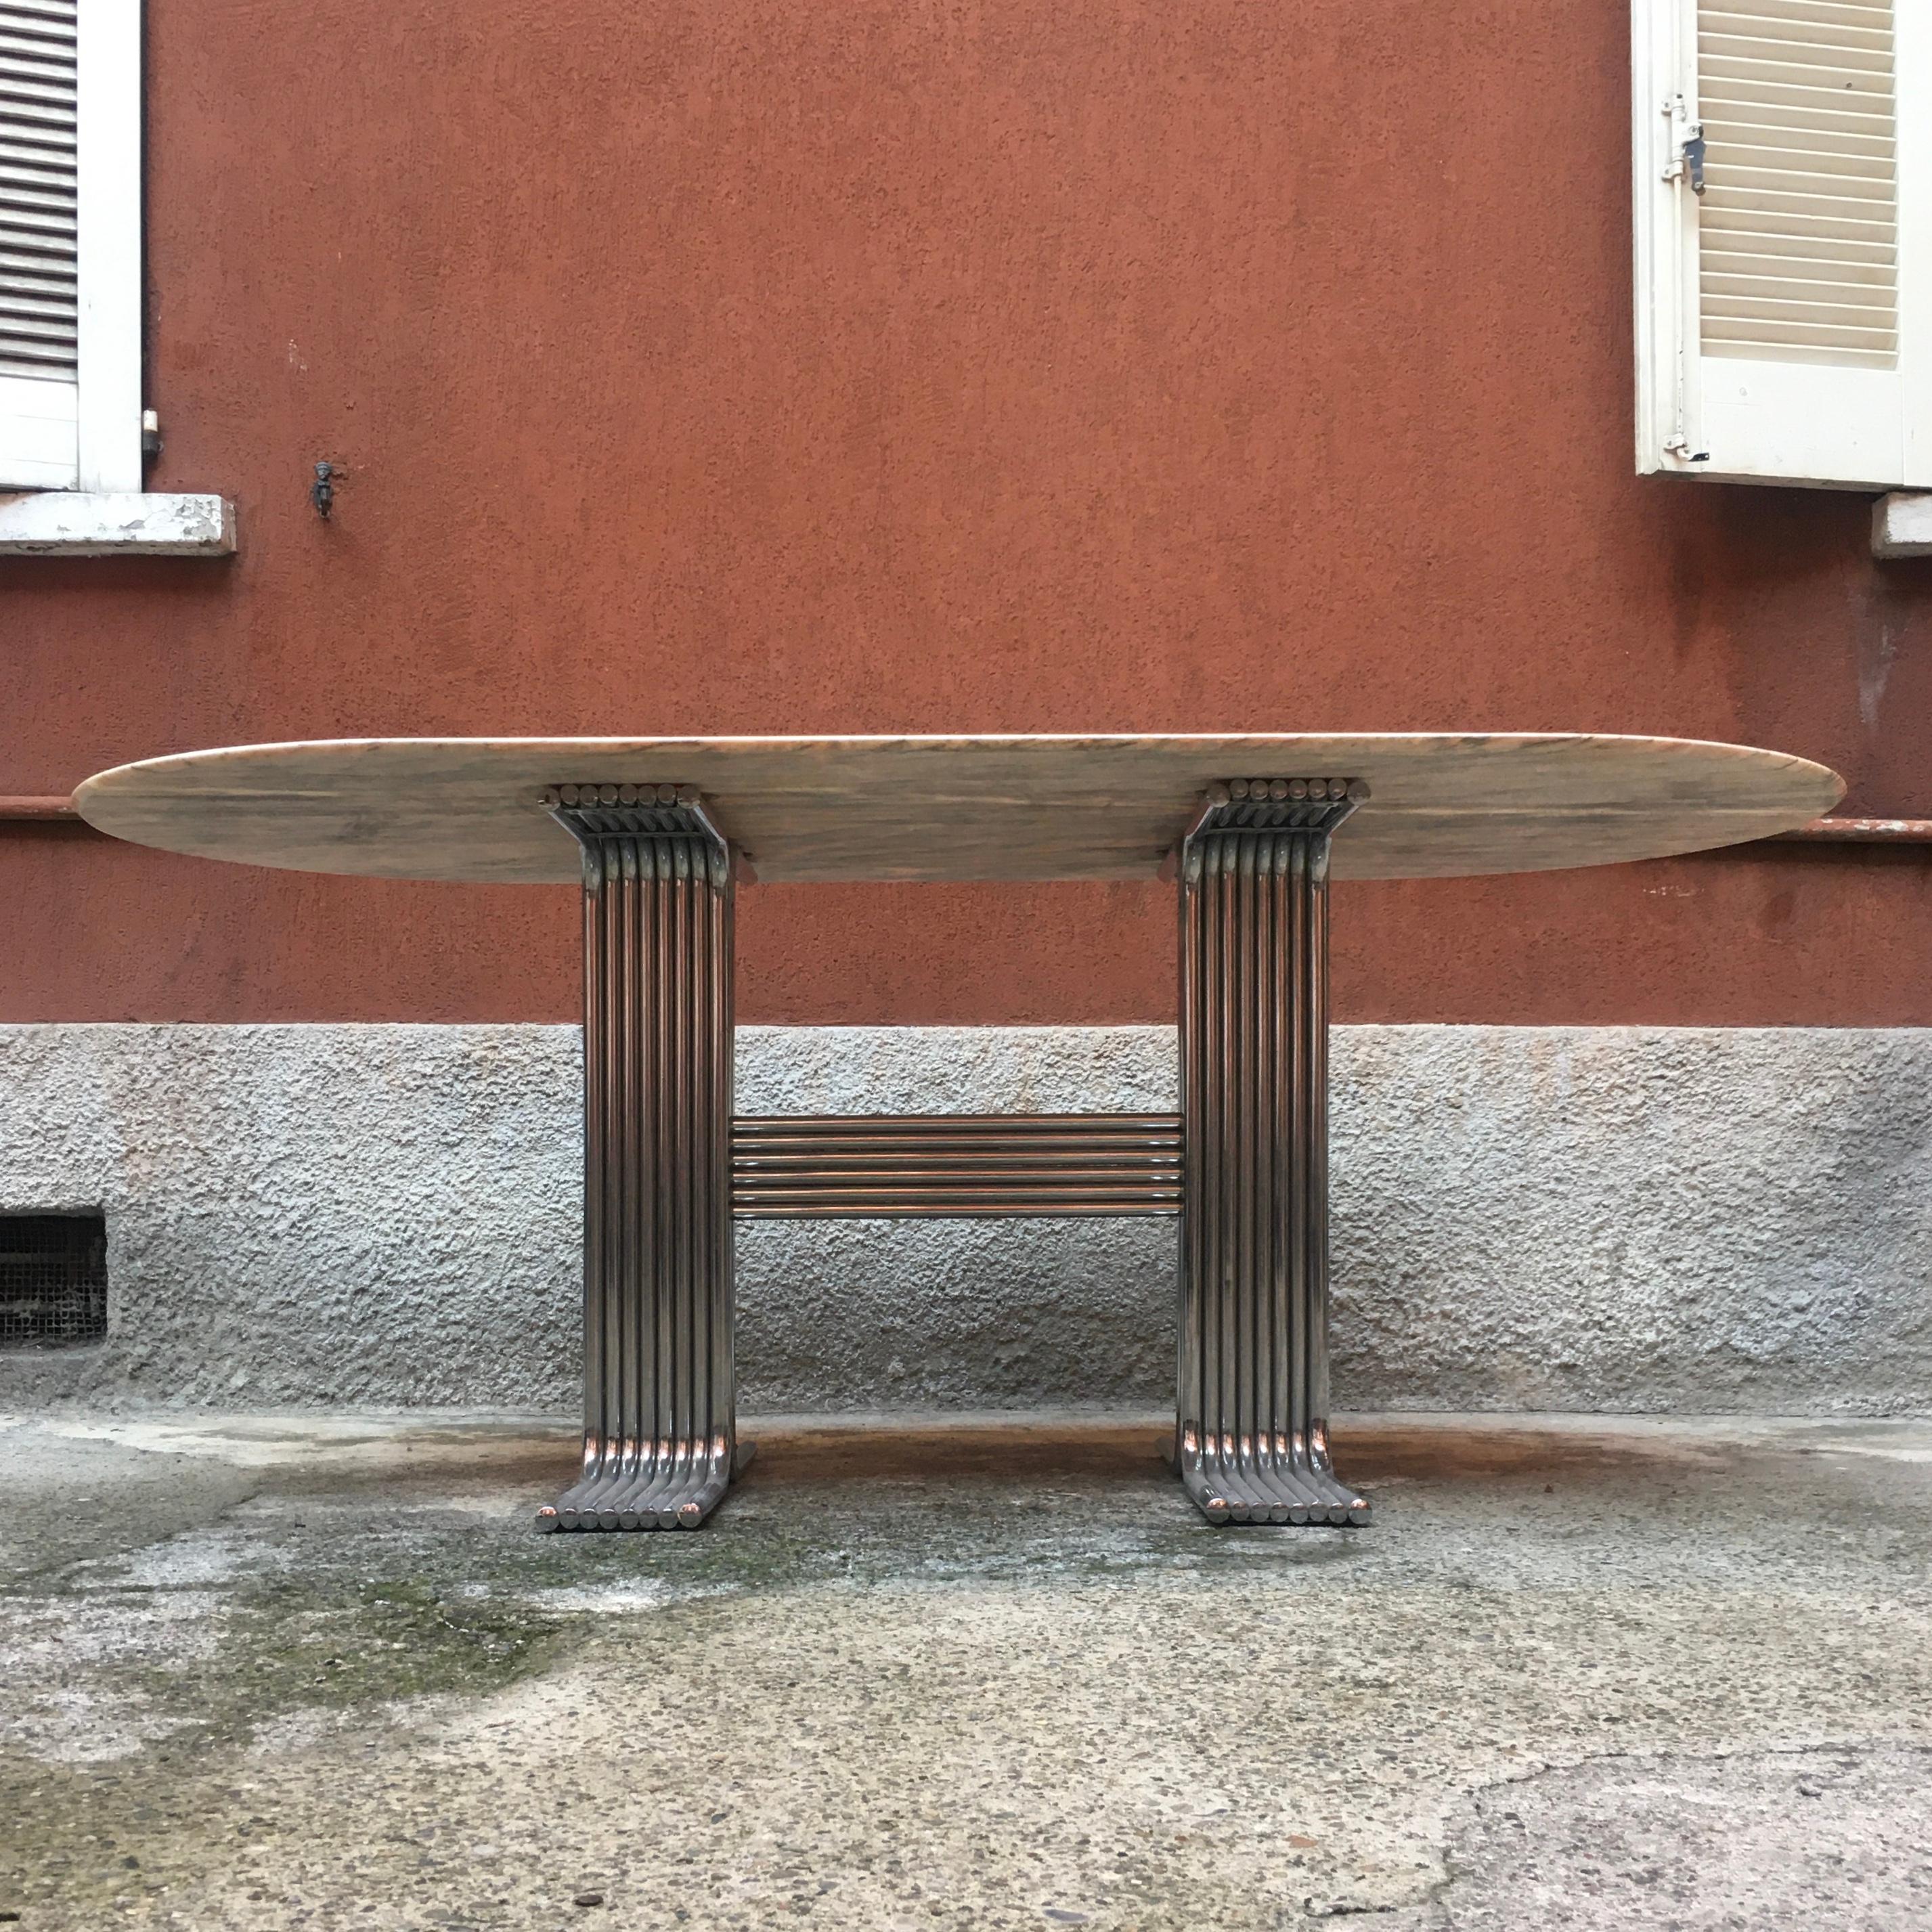 Italian oval marble dining table, 1970s
Oval marble dining table with solid base formed by parallel chromed steel tubes
Fully restored.